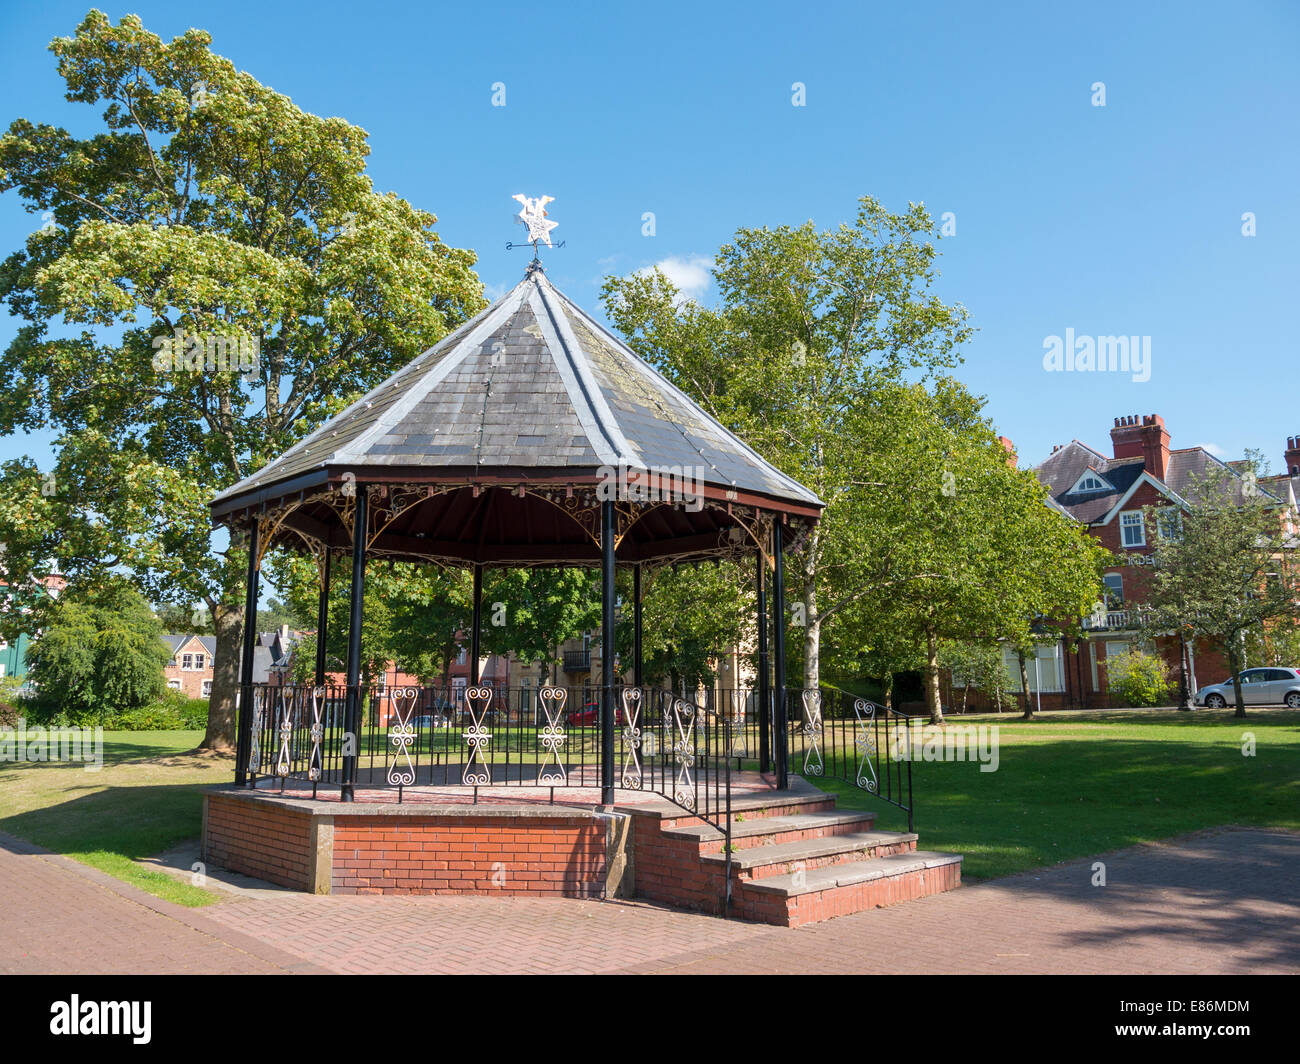 The Bandstand in Temple Gardens, Llandrindod Wells, Powys Wales. Stock Photo